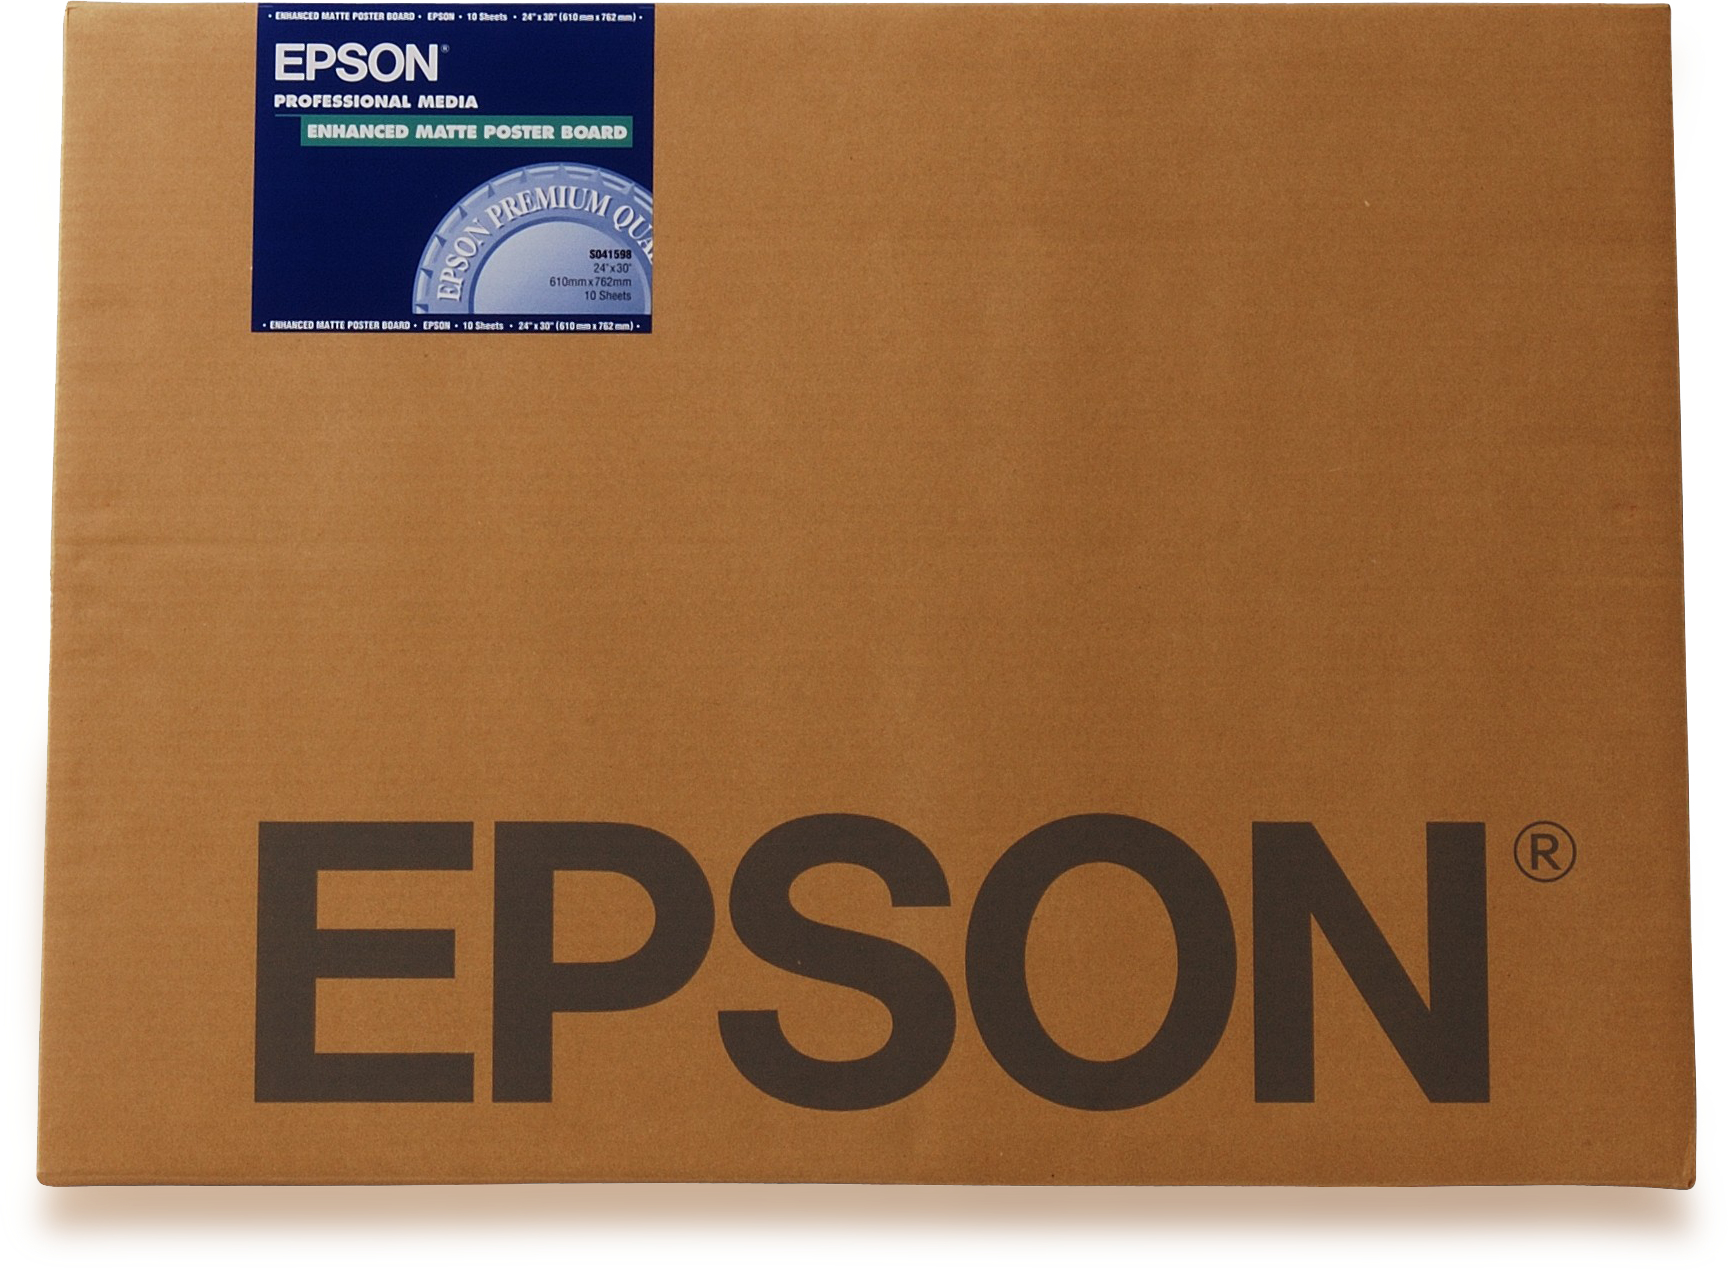 Epson Media, Media, Enhanced Matte Posterboard, Graphic Arts - Graphic And Signage Paper, A3+, 800 G/m2, 20 Sheets C13S042110 - C2000